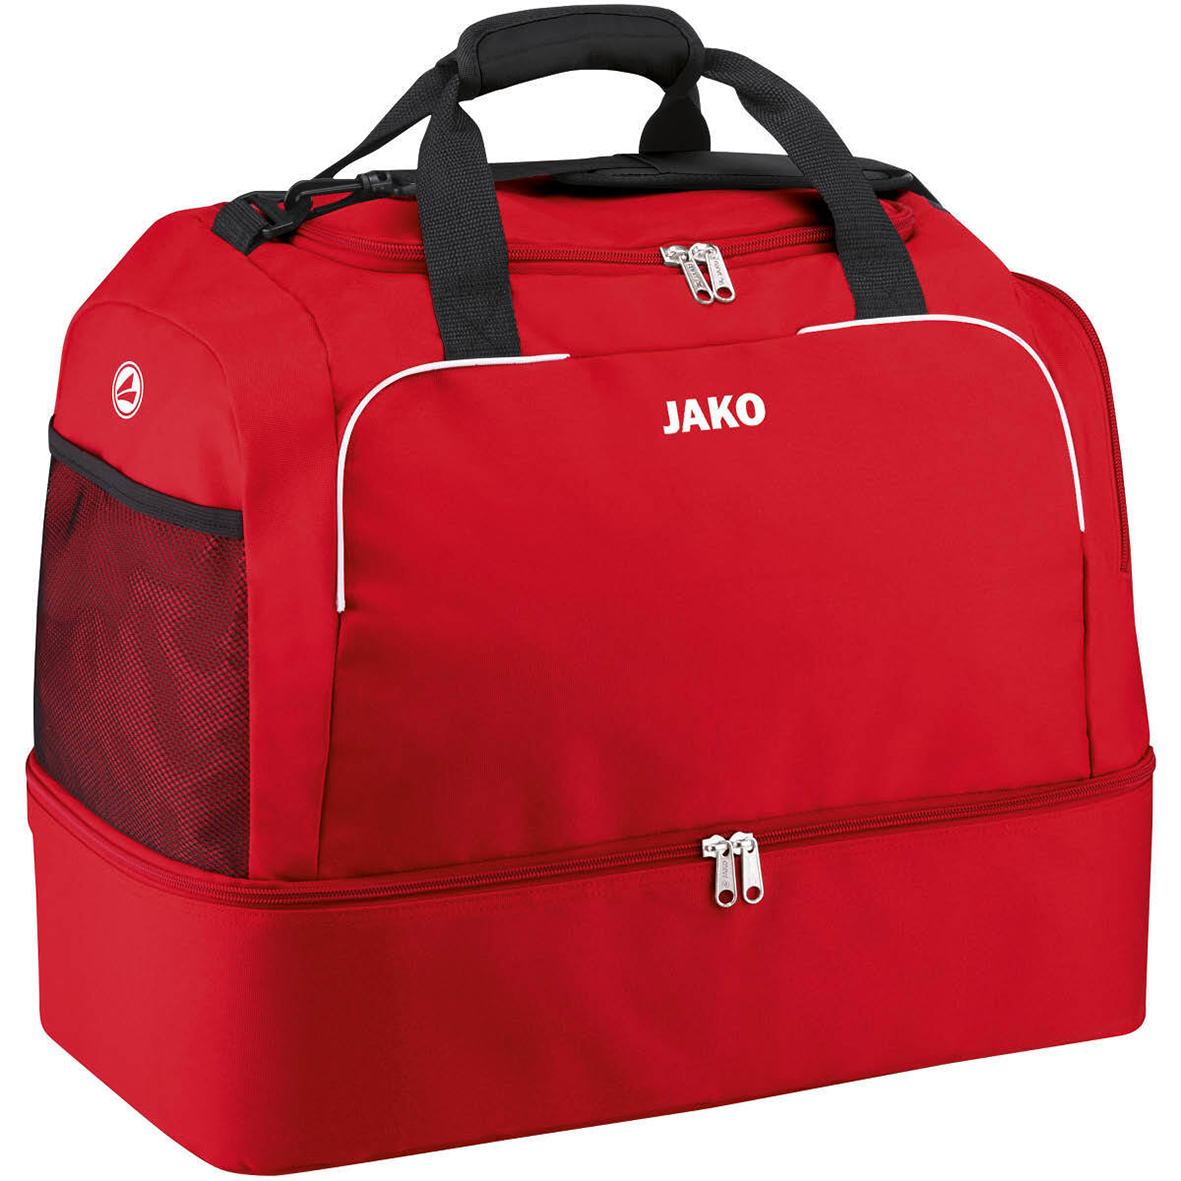 SPORTS BAG JAKO CLASSICO WITH BASE COMPARTMENT, RED.